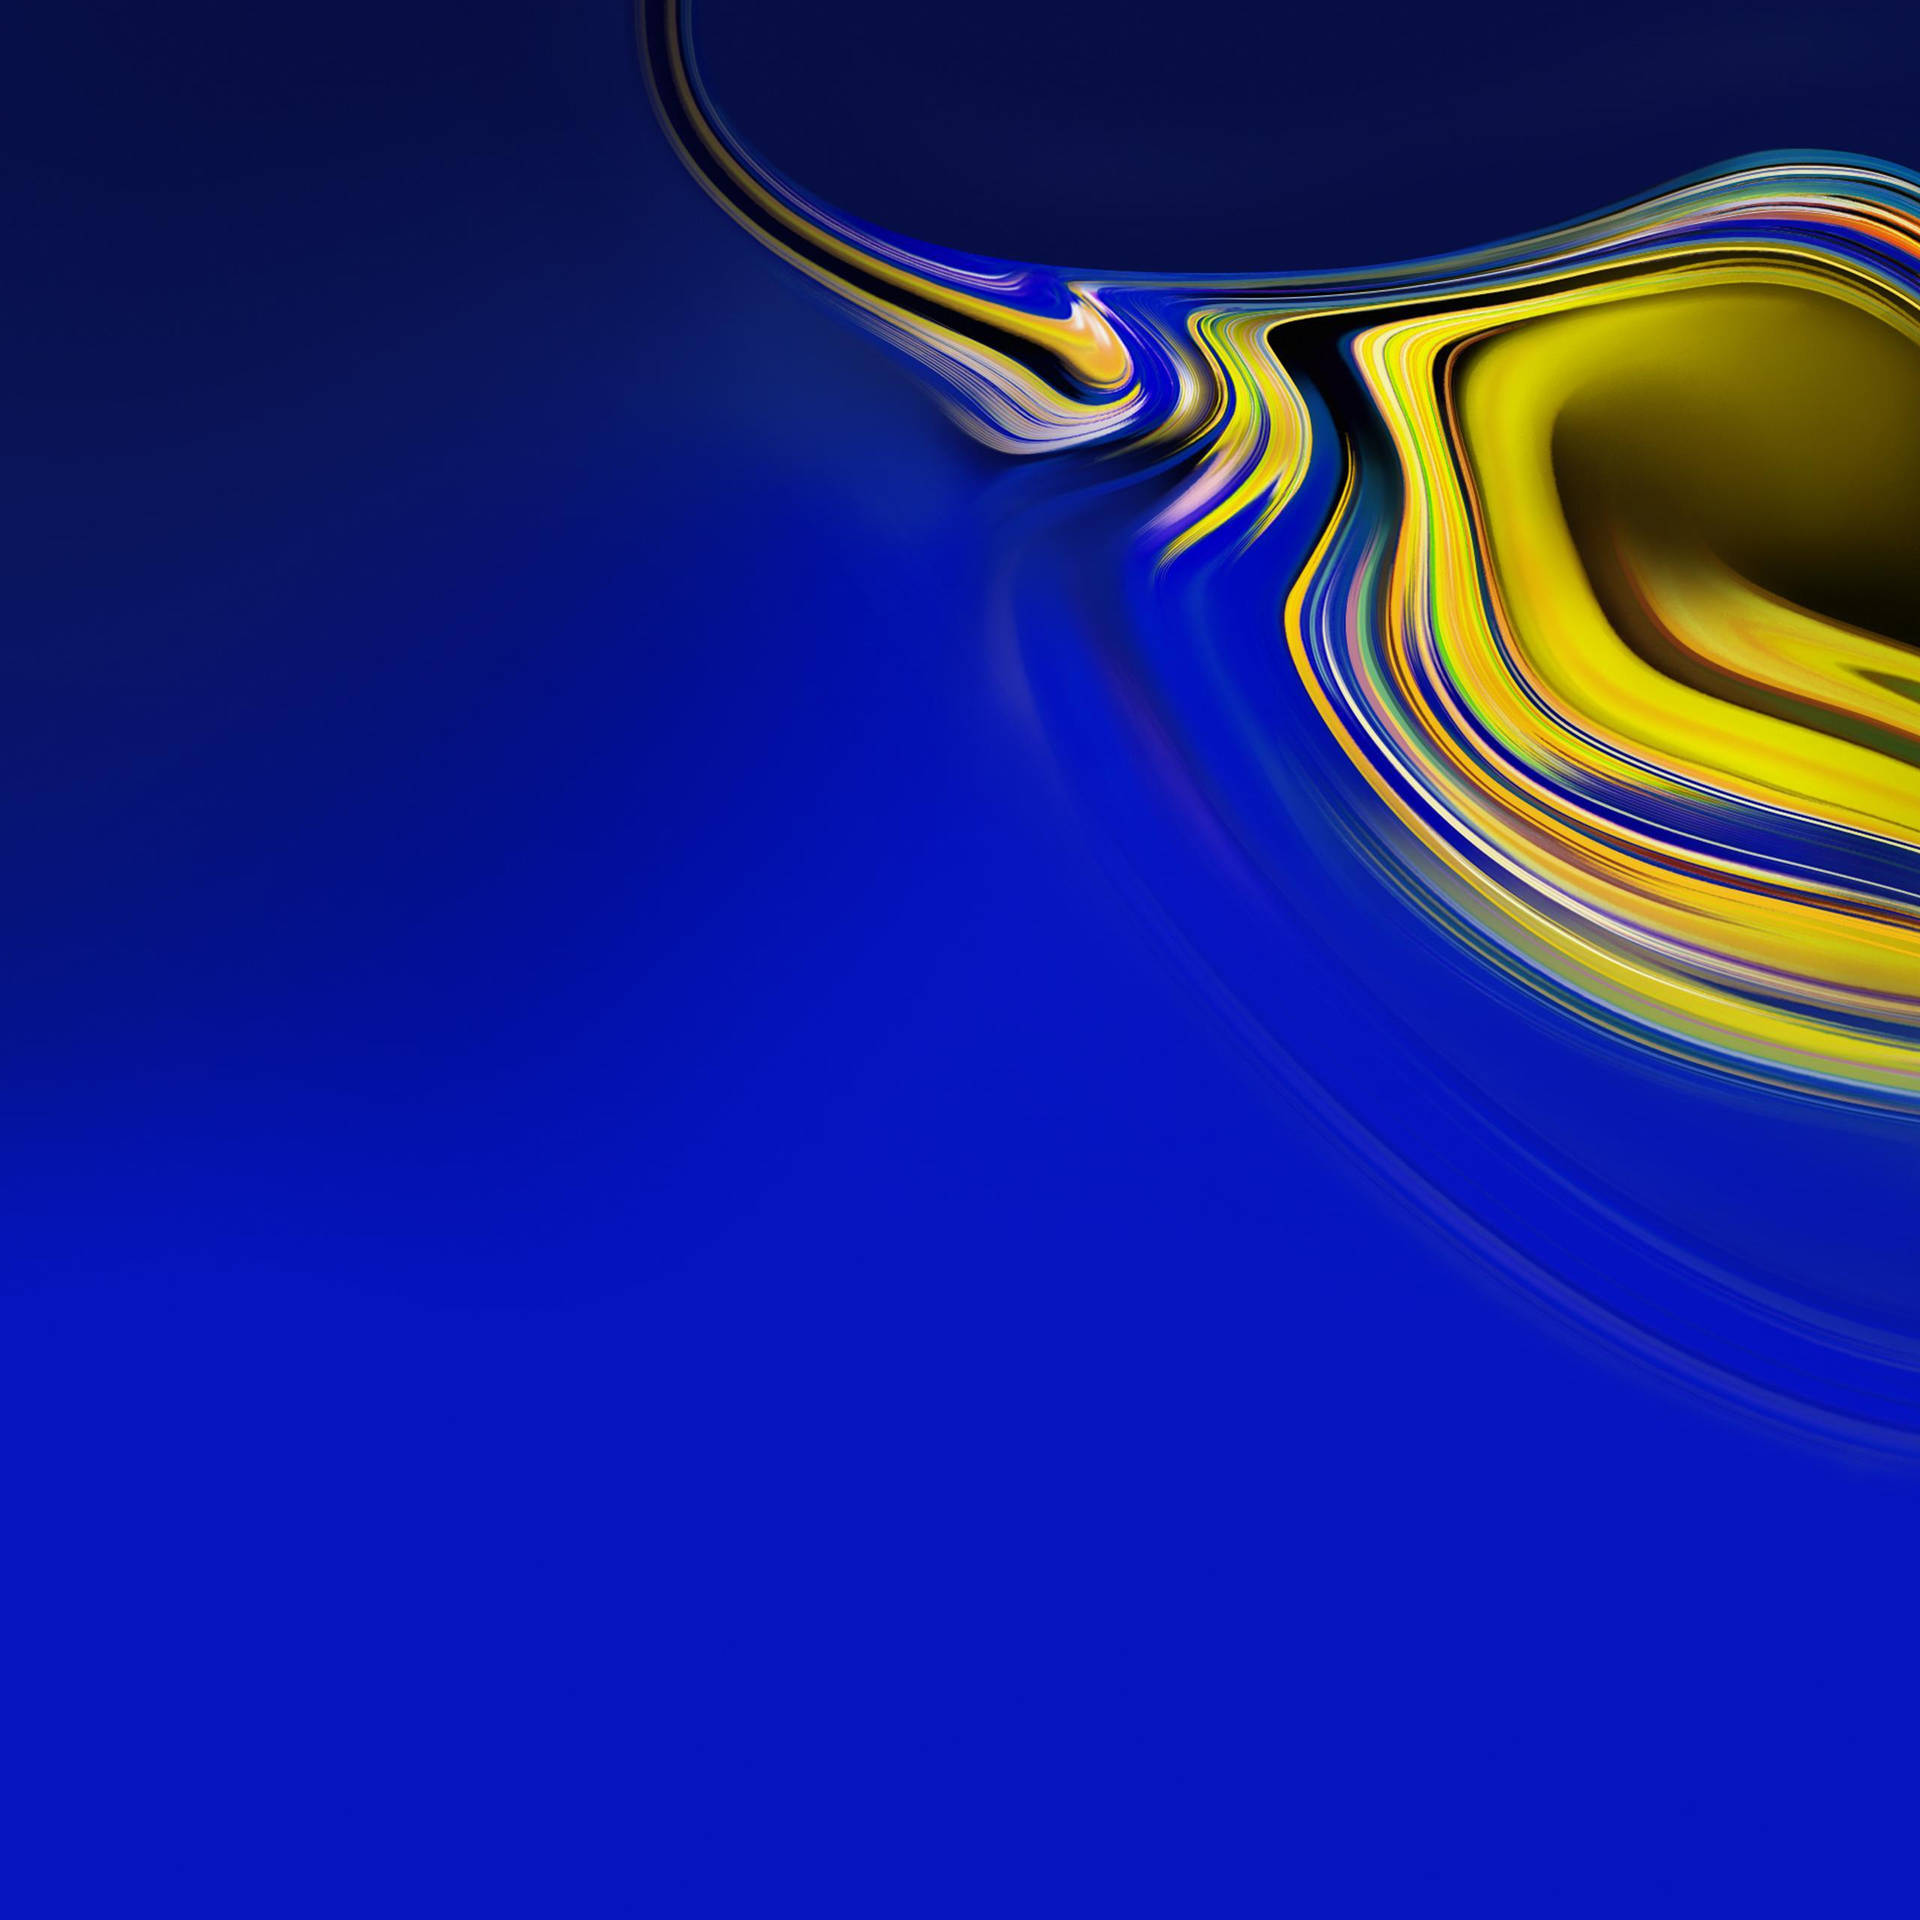 Royal Blue Yellow Samsung Galaxy Tablet Background